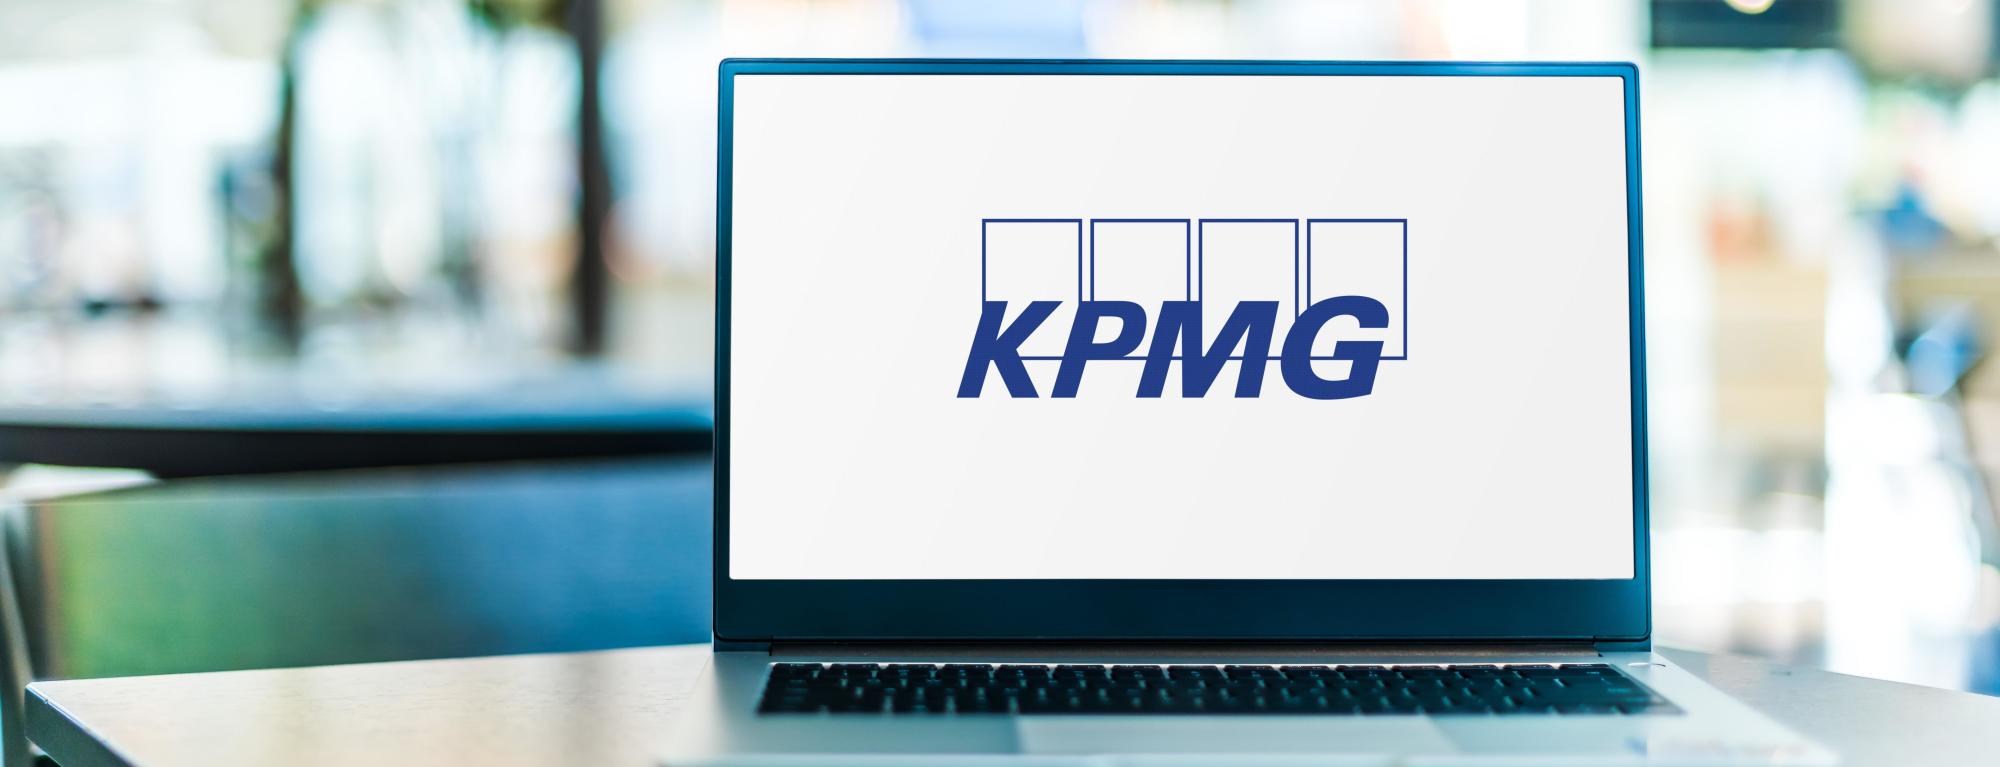 KPMG and Carillion – What’s the Latest?